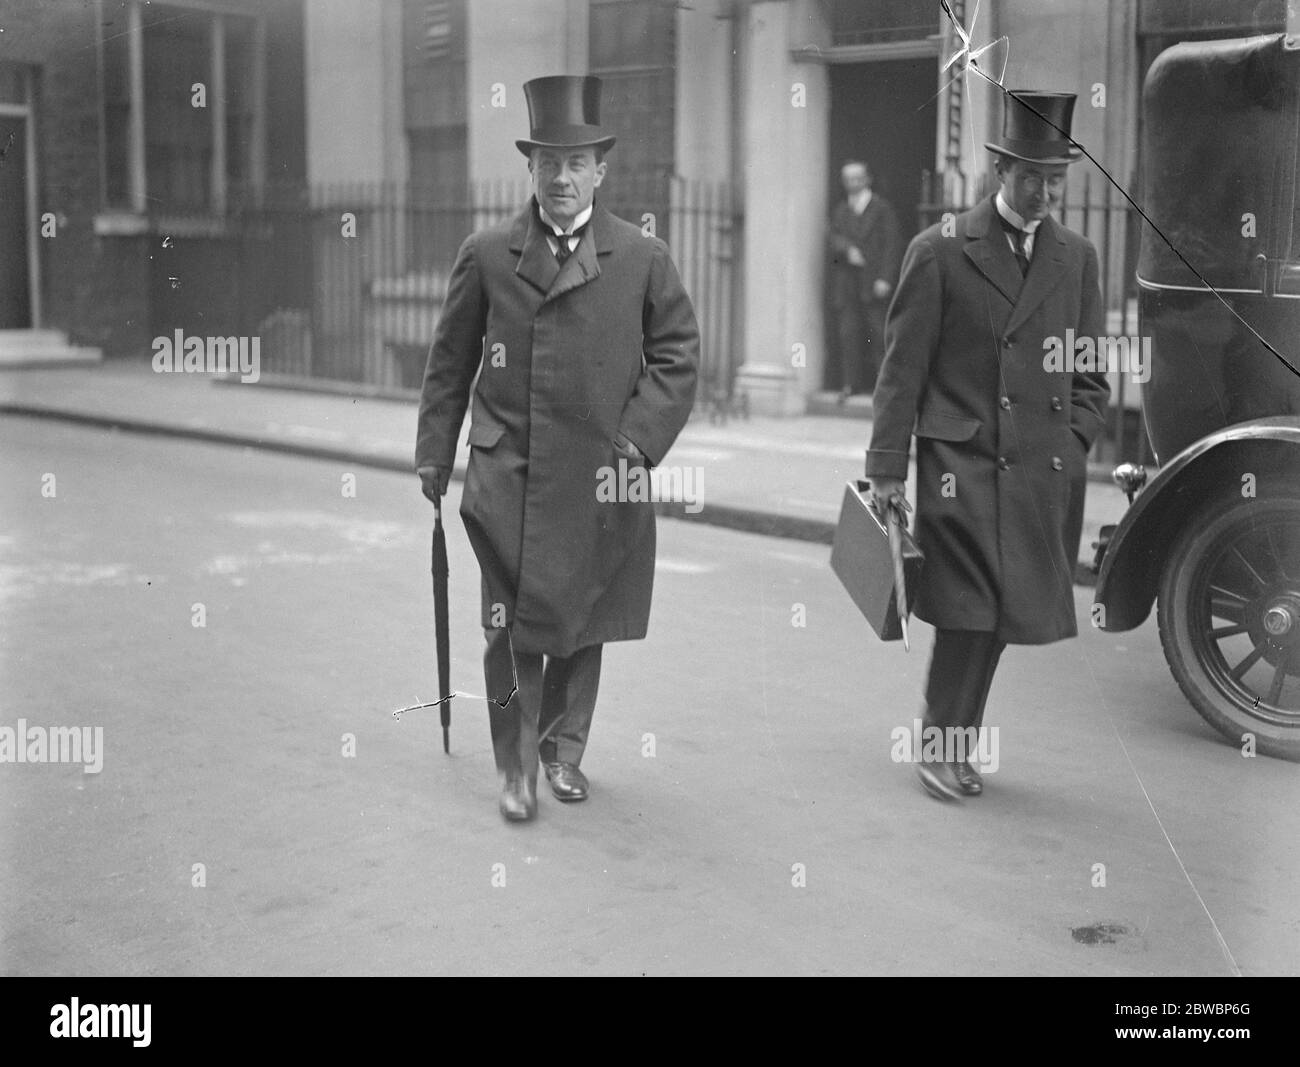 The Chancellor leaves Downing Street with the budget secrets . Mr Stanley Baldwin ( left ) Chancellor of the Exchequer , leaving Downing Street for the House of Commons to introduce the budget . His secretary is seen with hand bag containing the budget secrets . 16 April 1923 Stock Photo